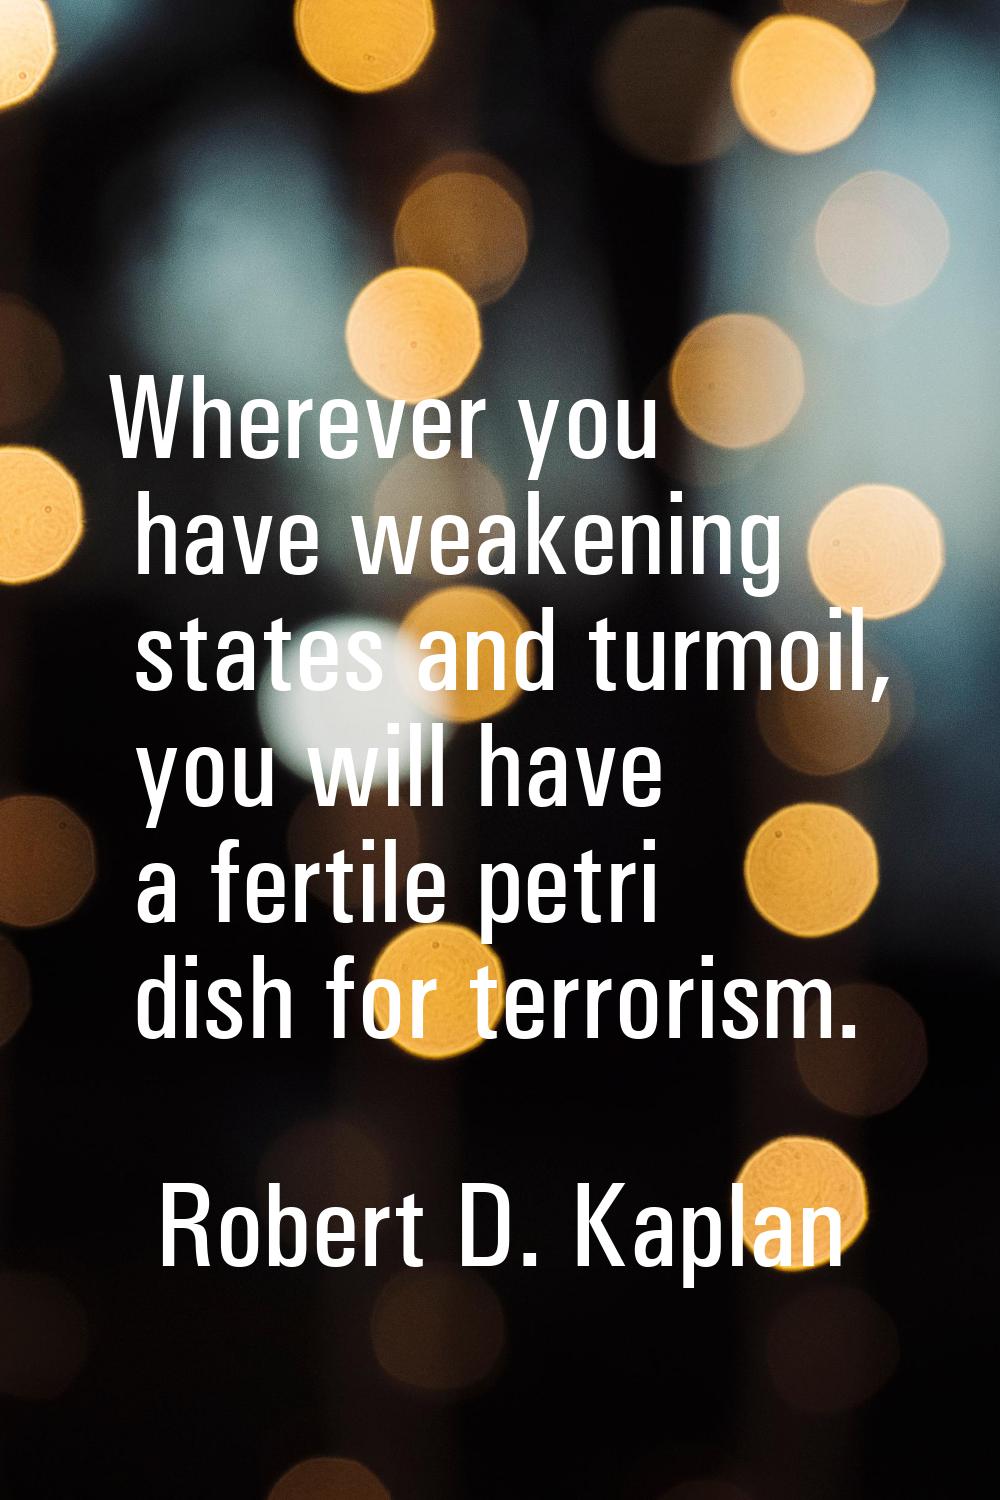 Wherever you have weakening states and turmoil, you will have a fertile petri dish for terrorism.